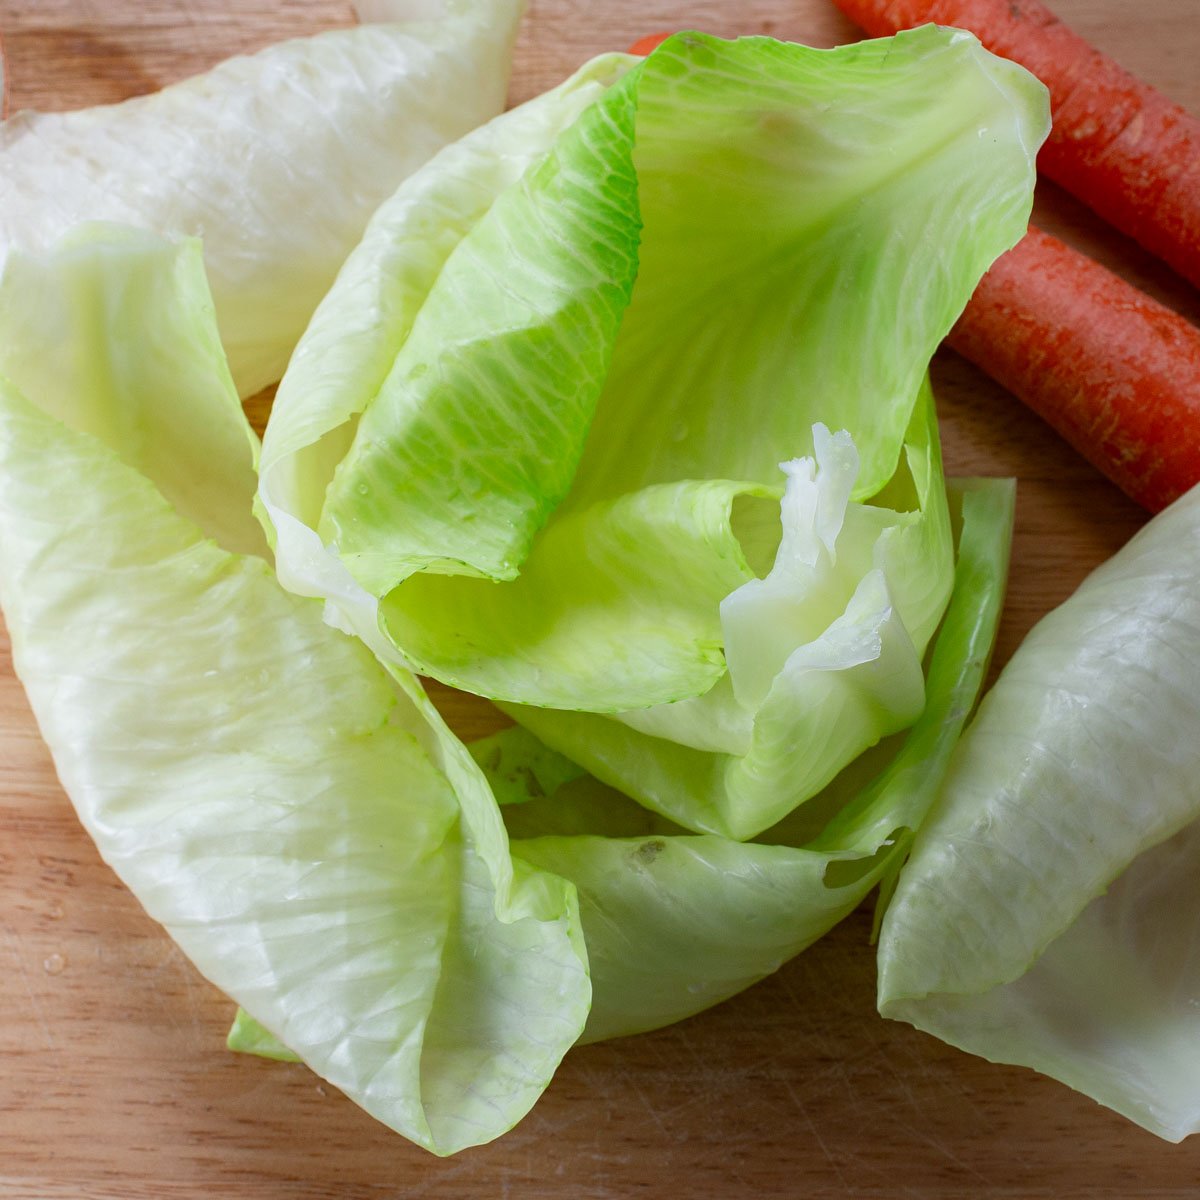 Boiled cabbage leaves and raw carrots.